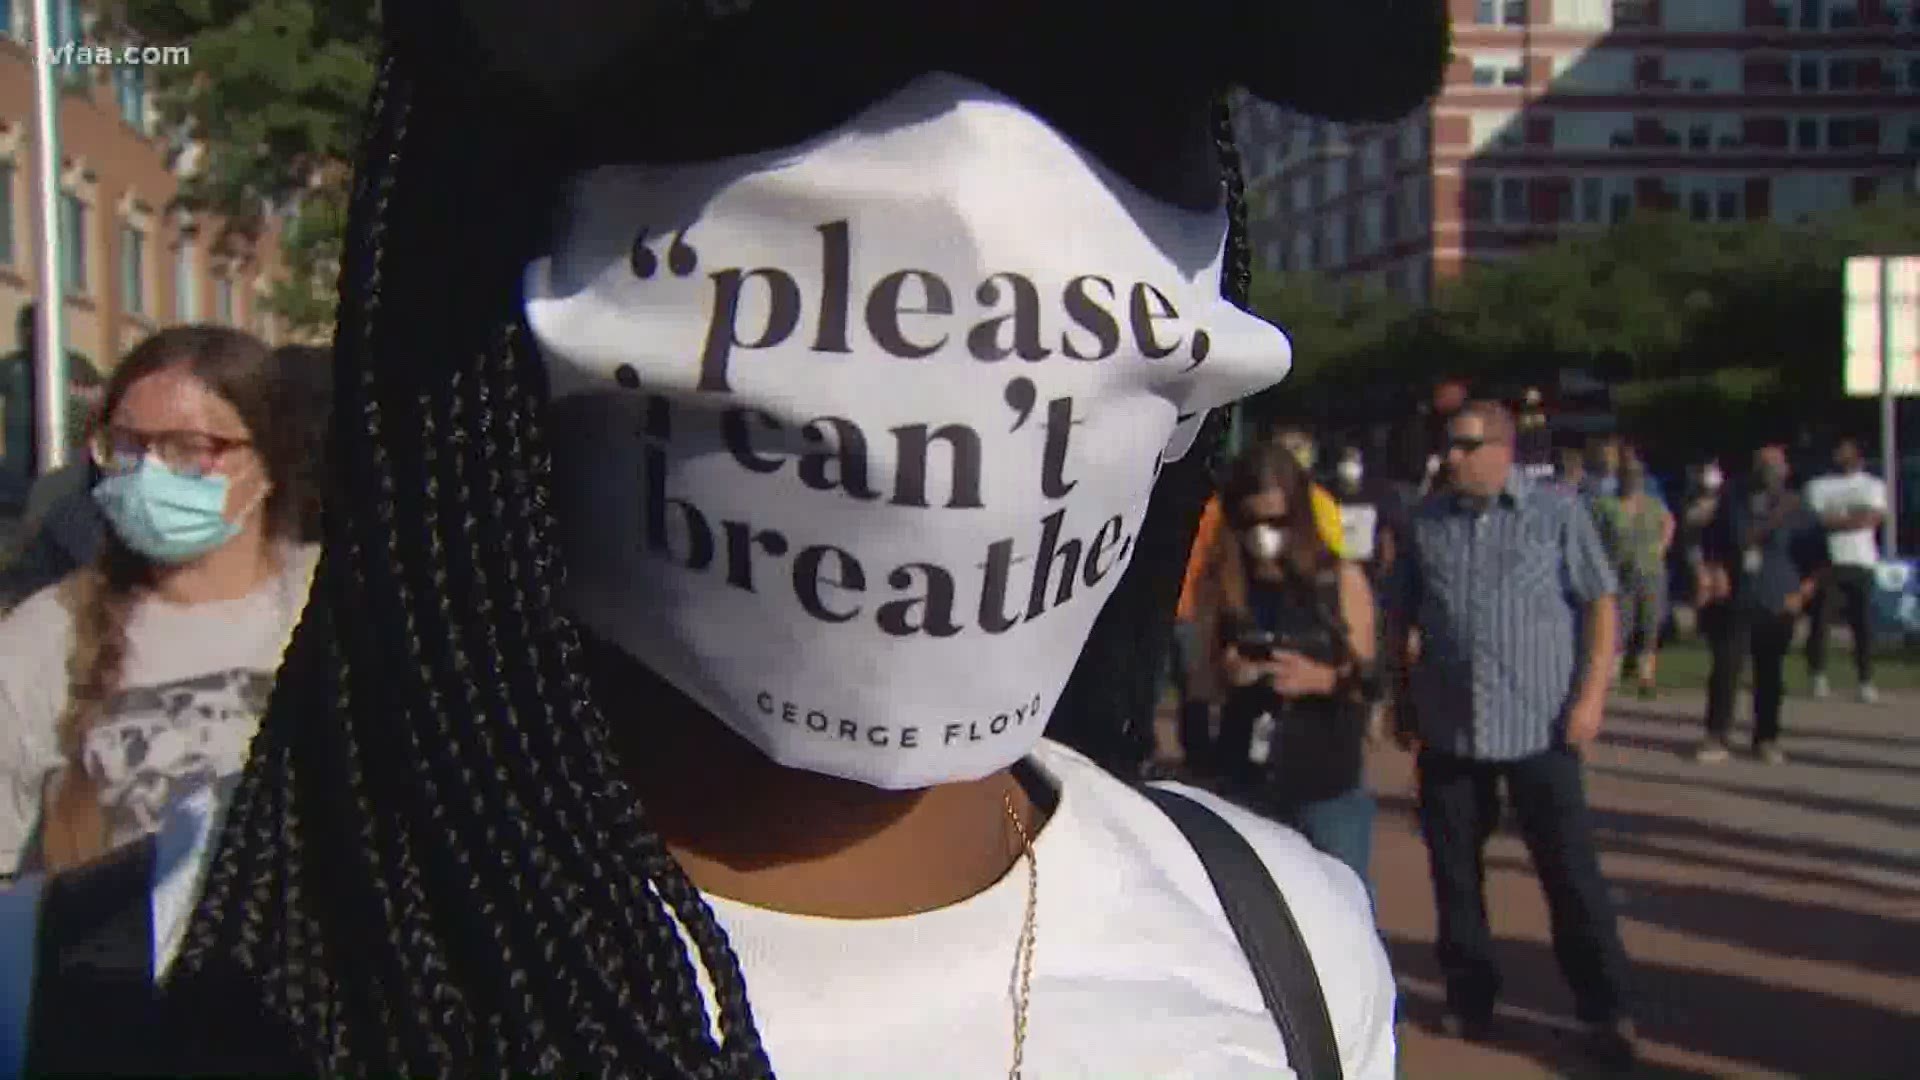 “We can’t breathe!” protesters chanted, at times taking a knee. They held a moment of silence in honor of George Floyd – a native Texan.